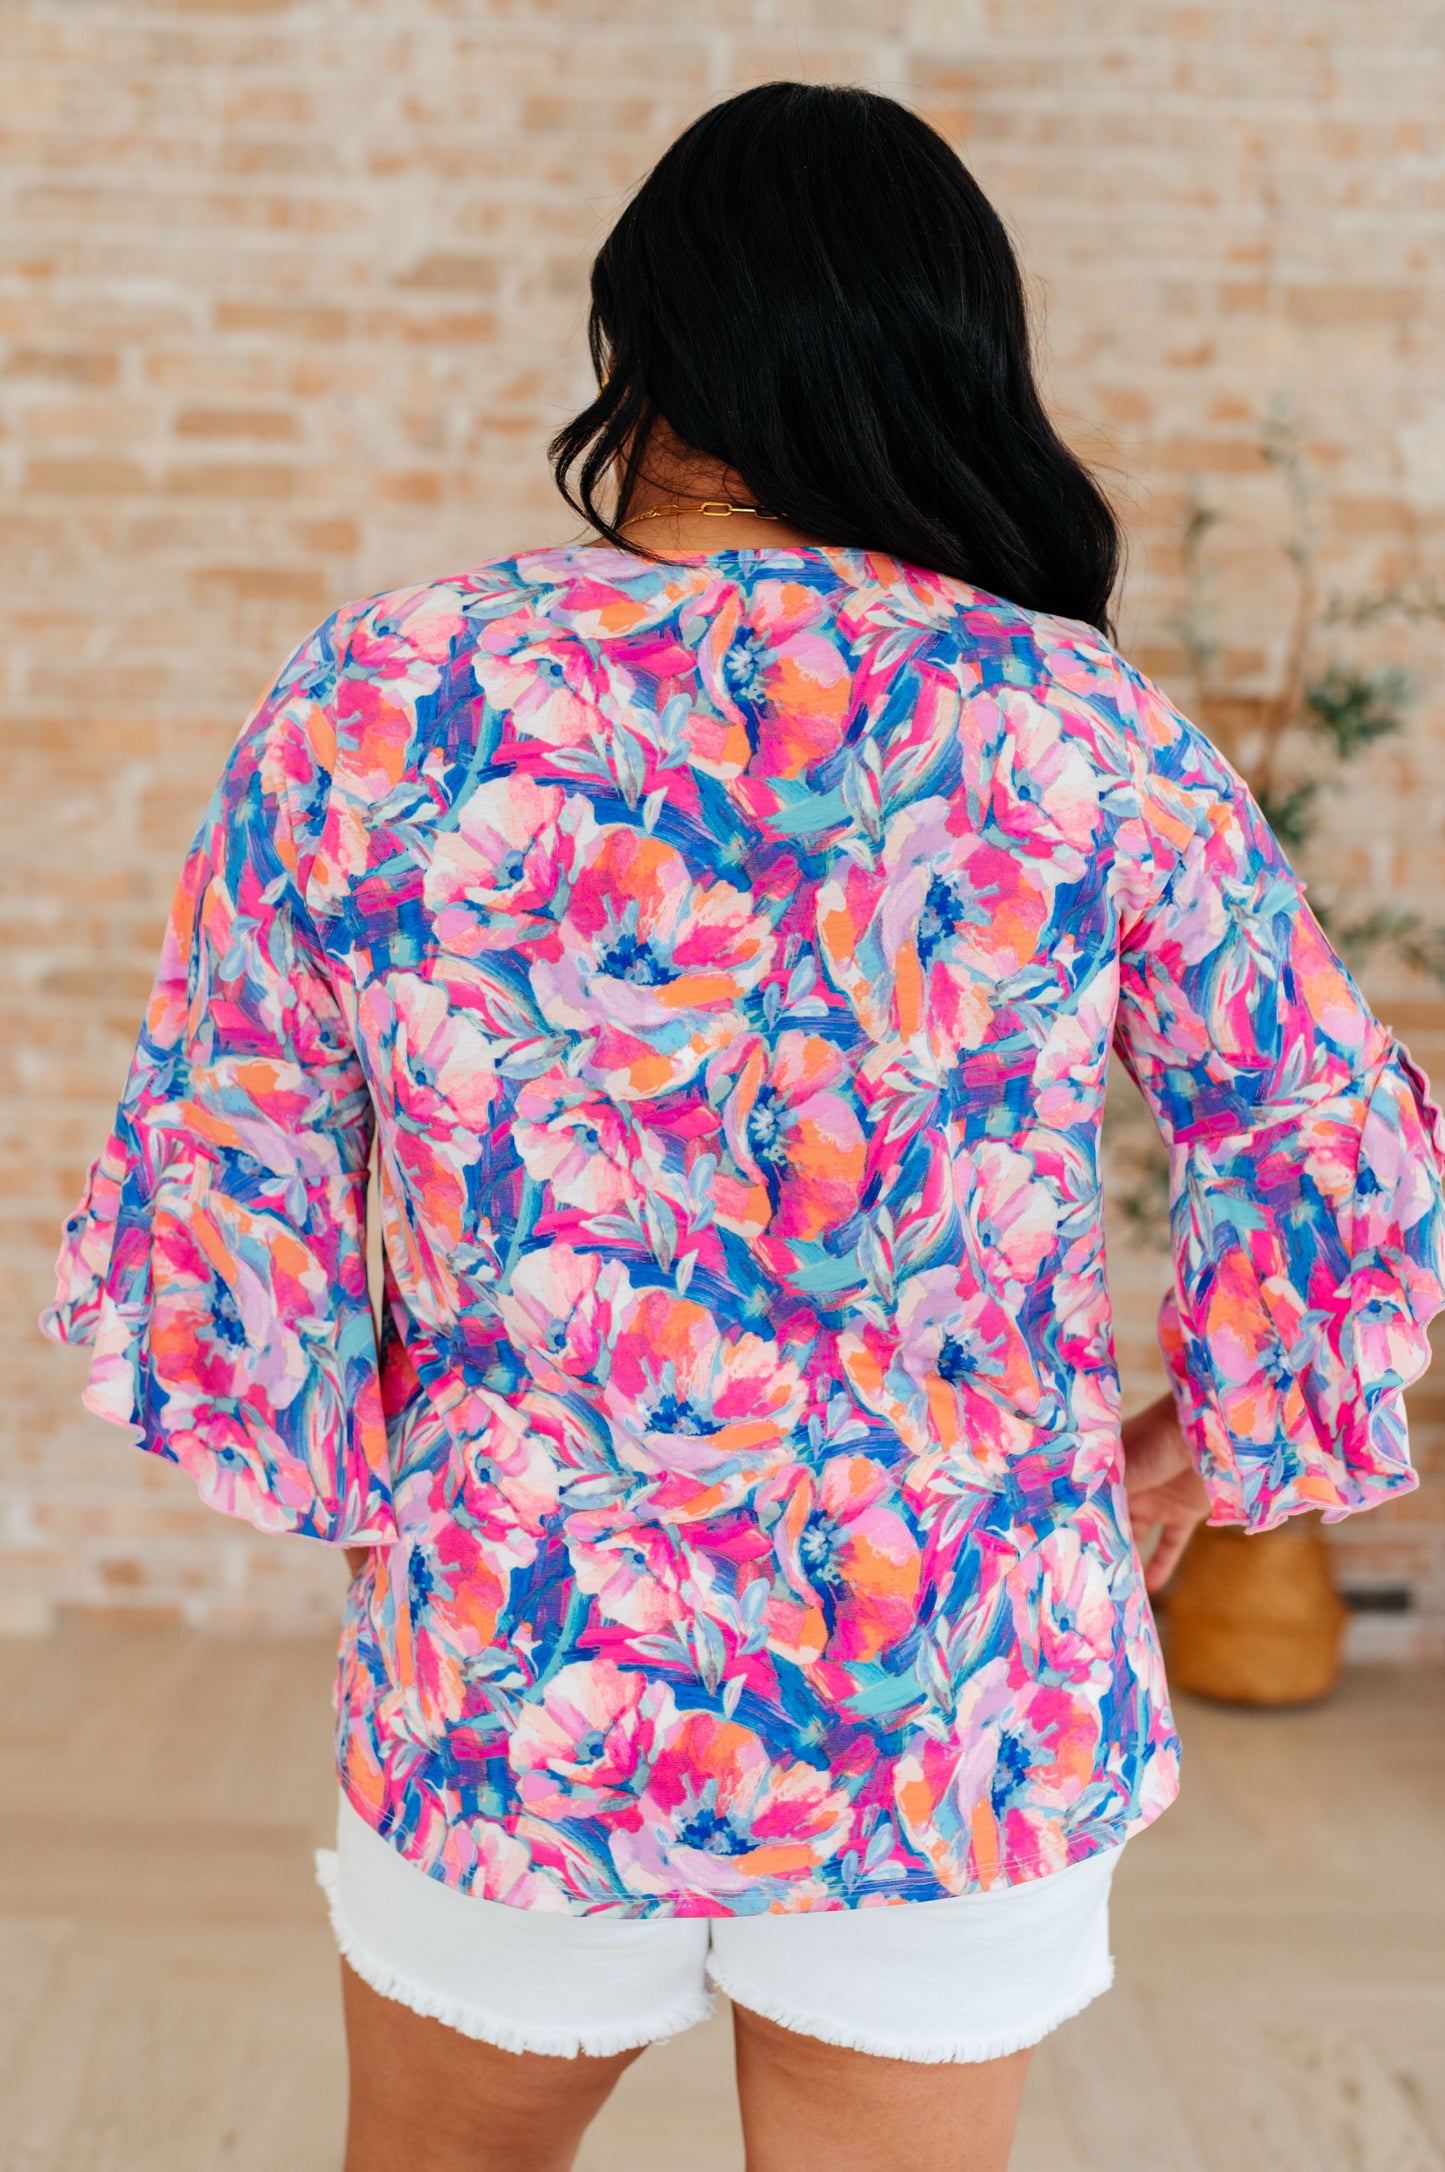 Bell Sleeve Top in Royal Brushed Floral